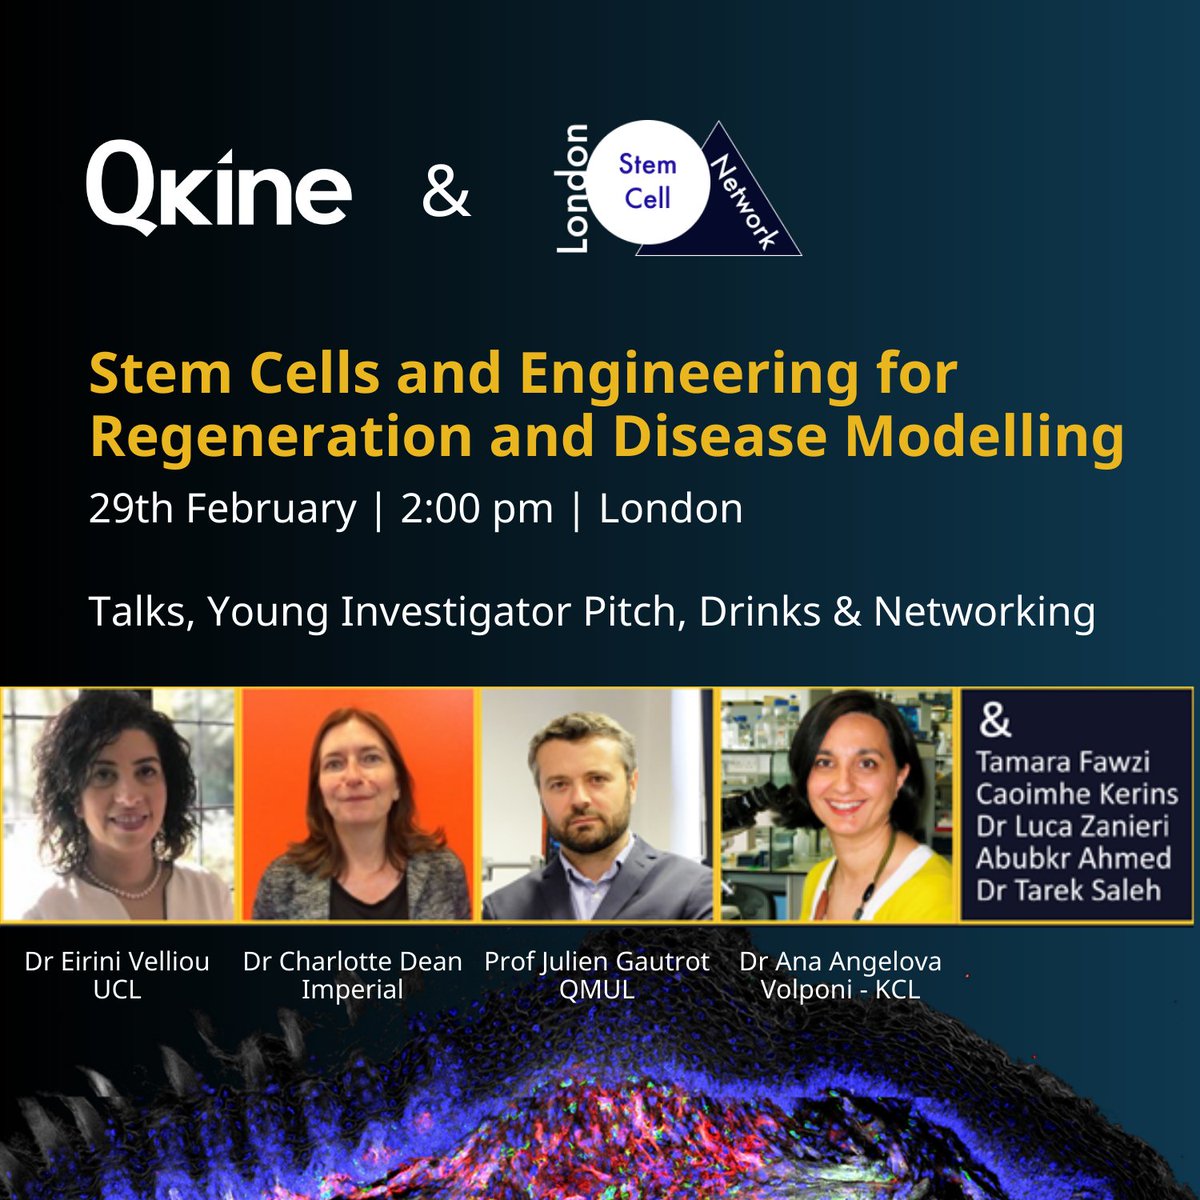 Don't miss our next workshop, co-organized with @LSCN_UK. Speakers include @Eirini_Velliou, Charlotte Dean, @GautrotL & Ana Angelova Volponi. Register here - zurl.co/quif #StemCells #Research #Workshop